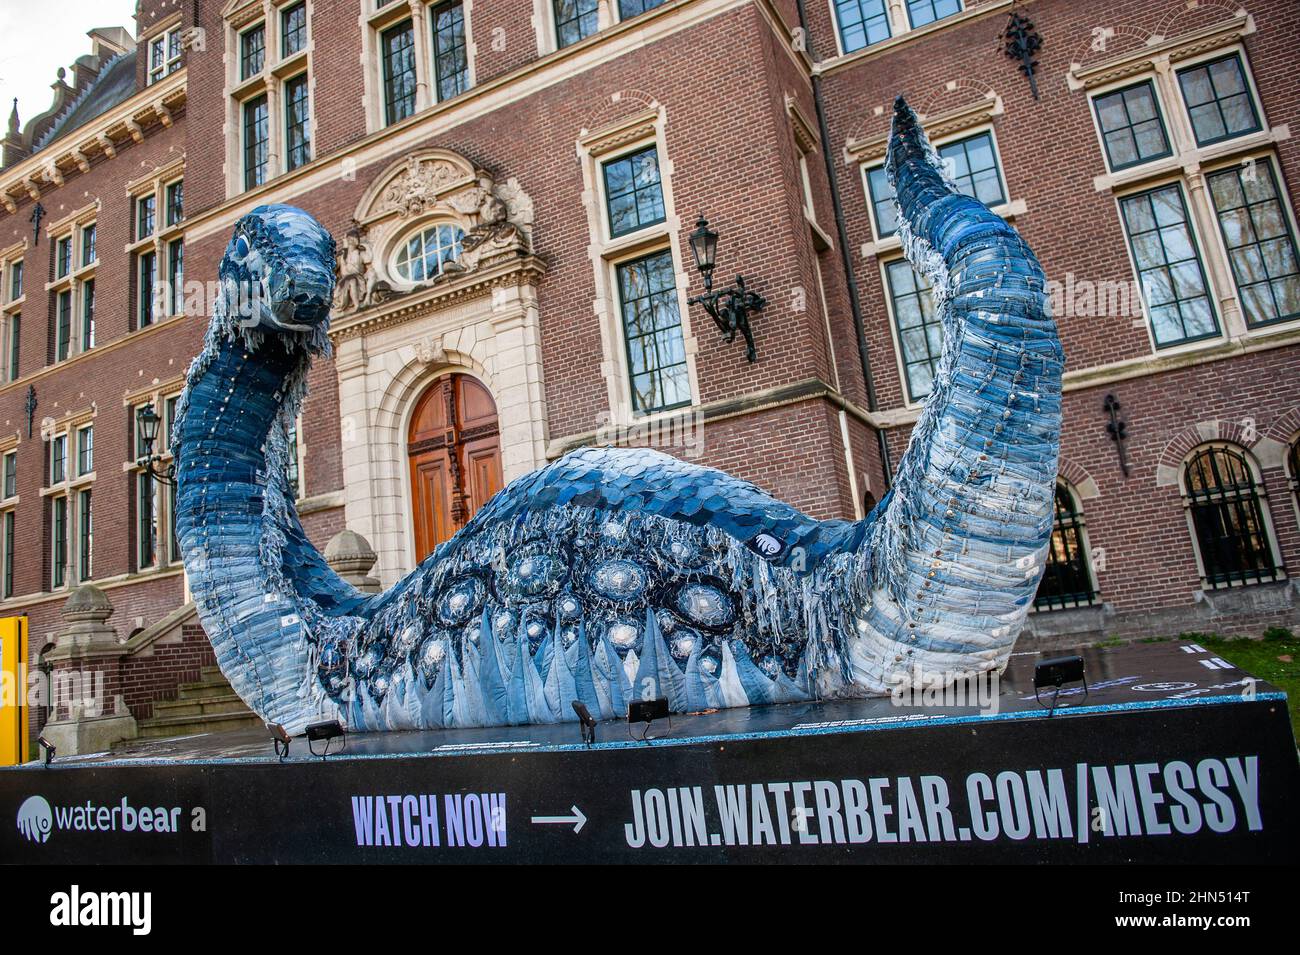 February 12th, Amsterdam. During the celebration of the COP26 in Glasgow,  WaterBear teamed up with artist Billie Achilleos and circular denim brand MUD  Jeans to create a sculpture of Scotland's legendary sea